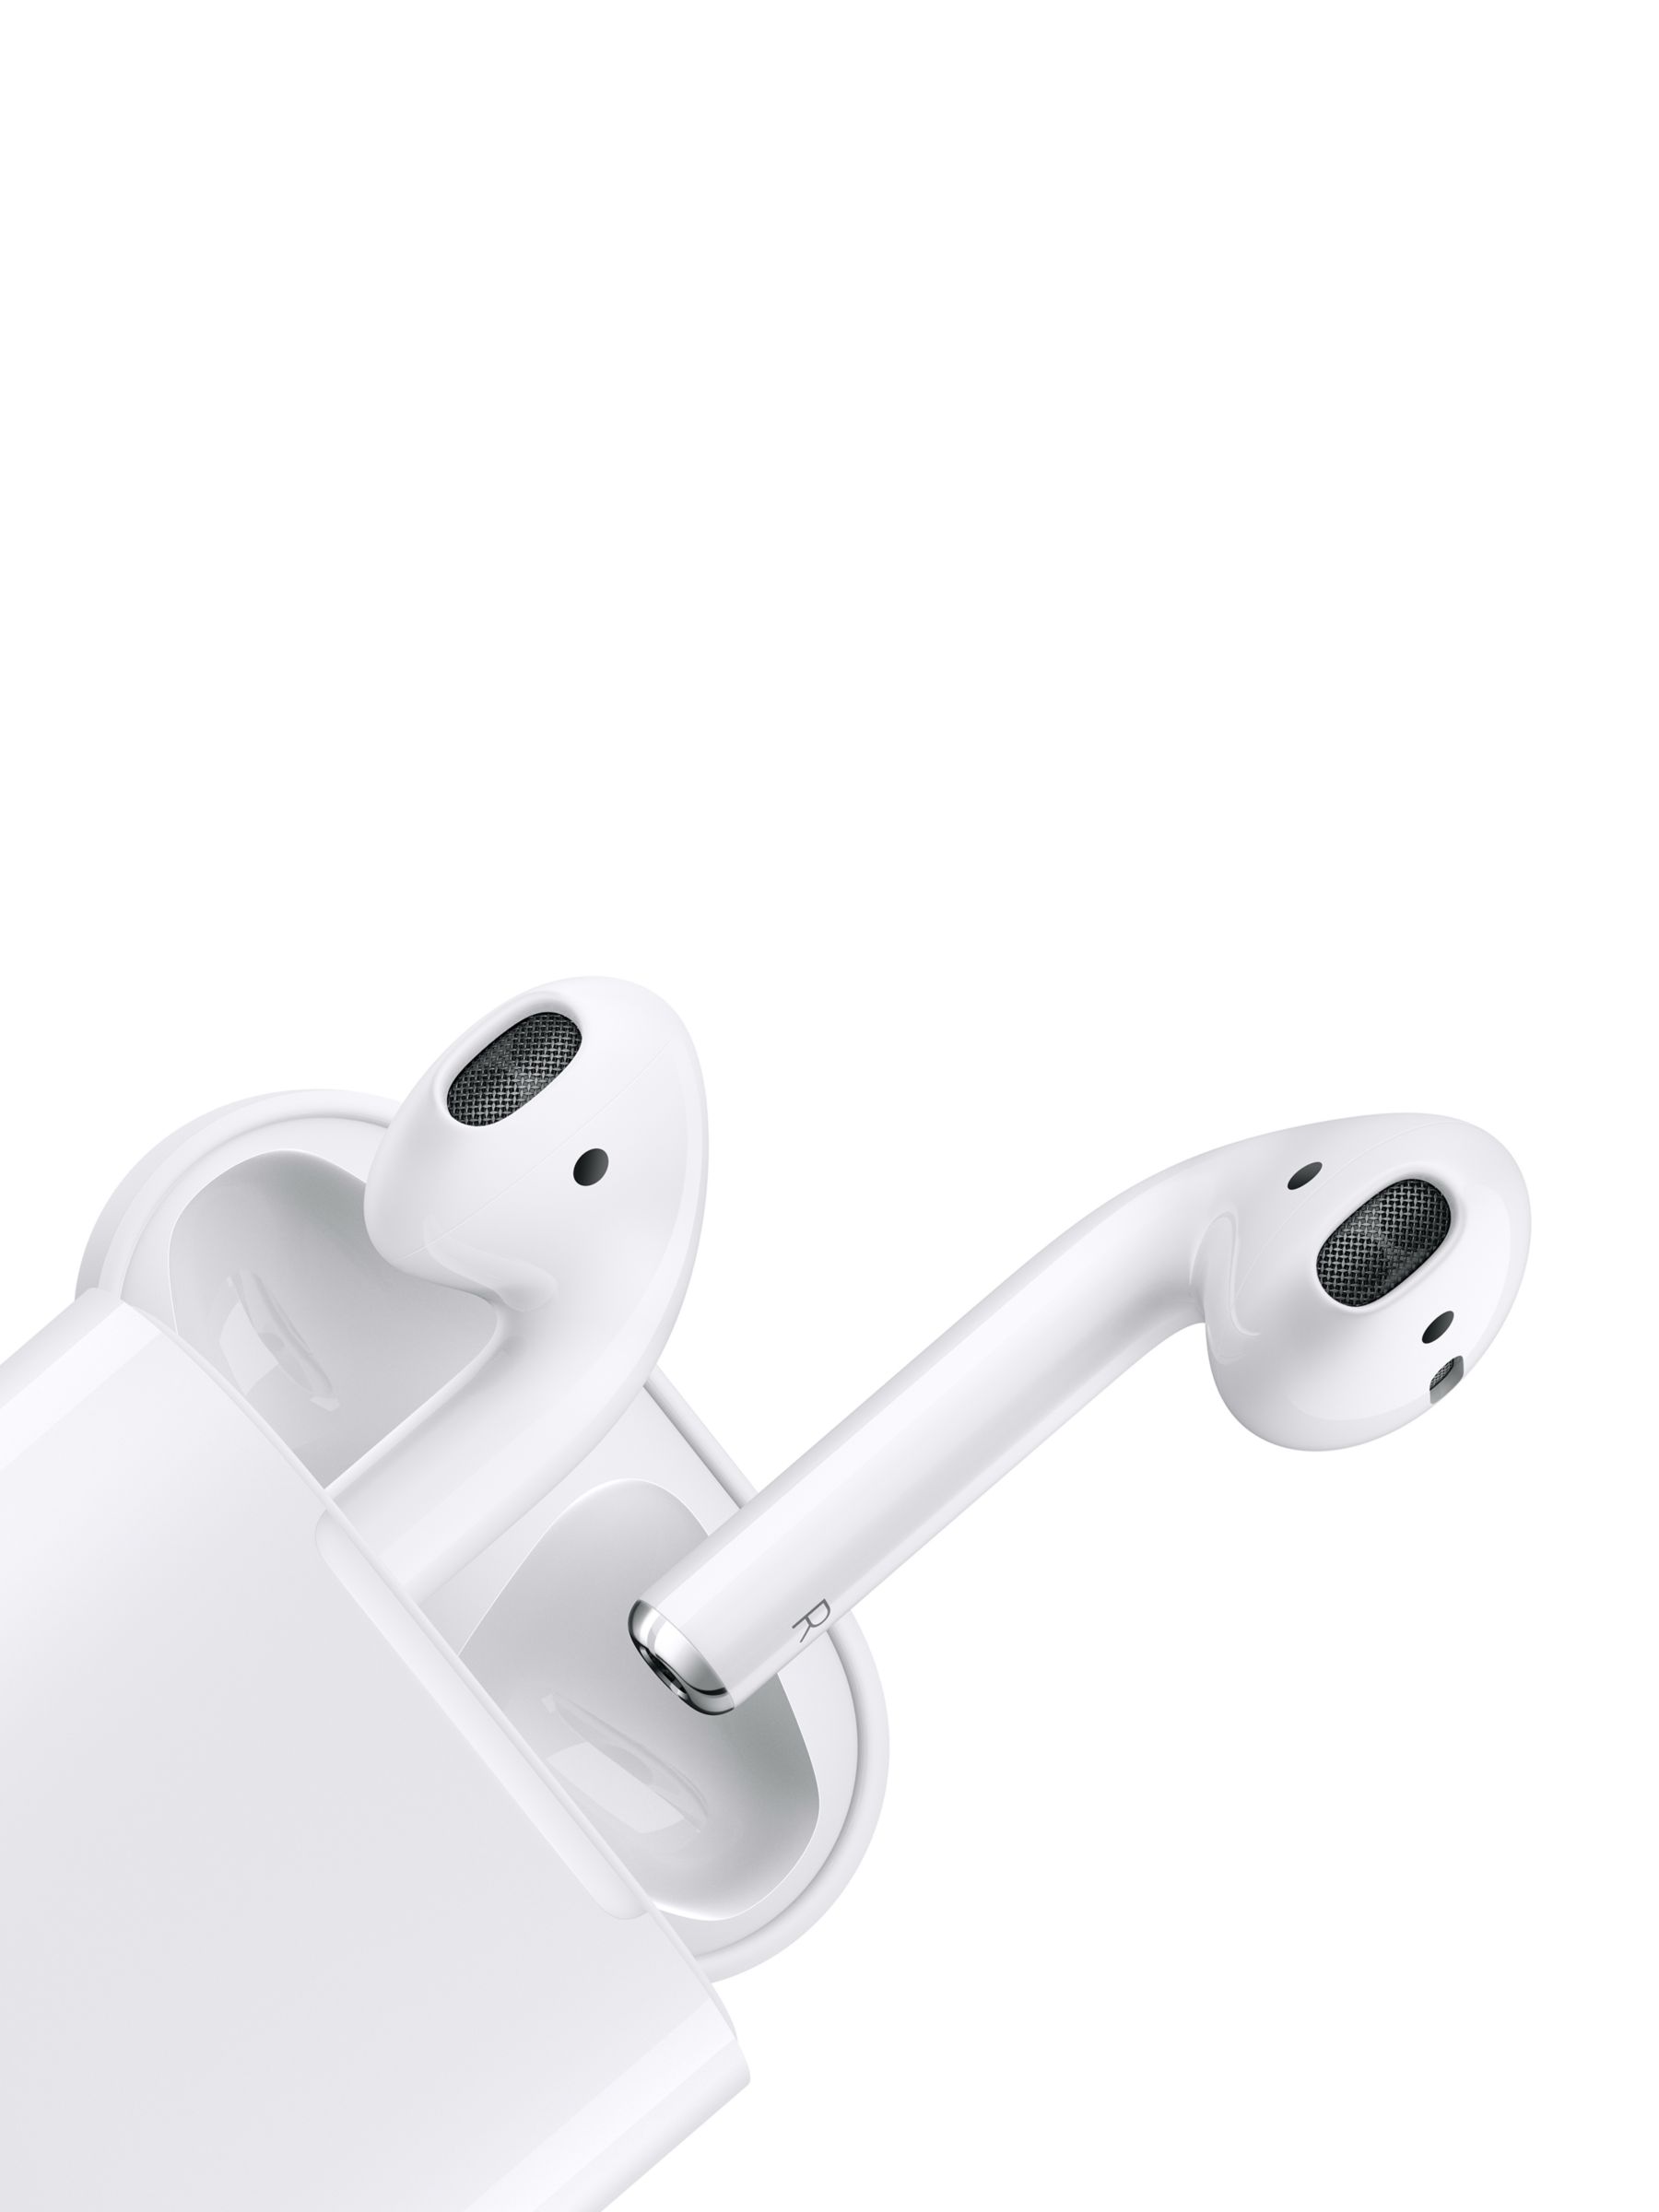 2019 Apple AirPods with Charging Case at John Lewis & Partners